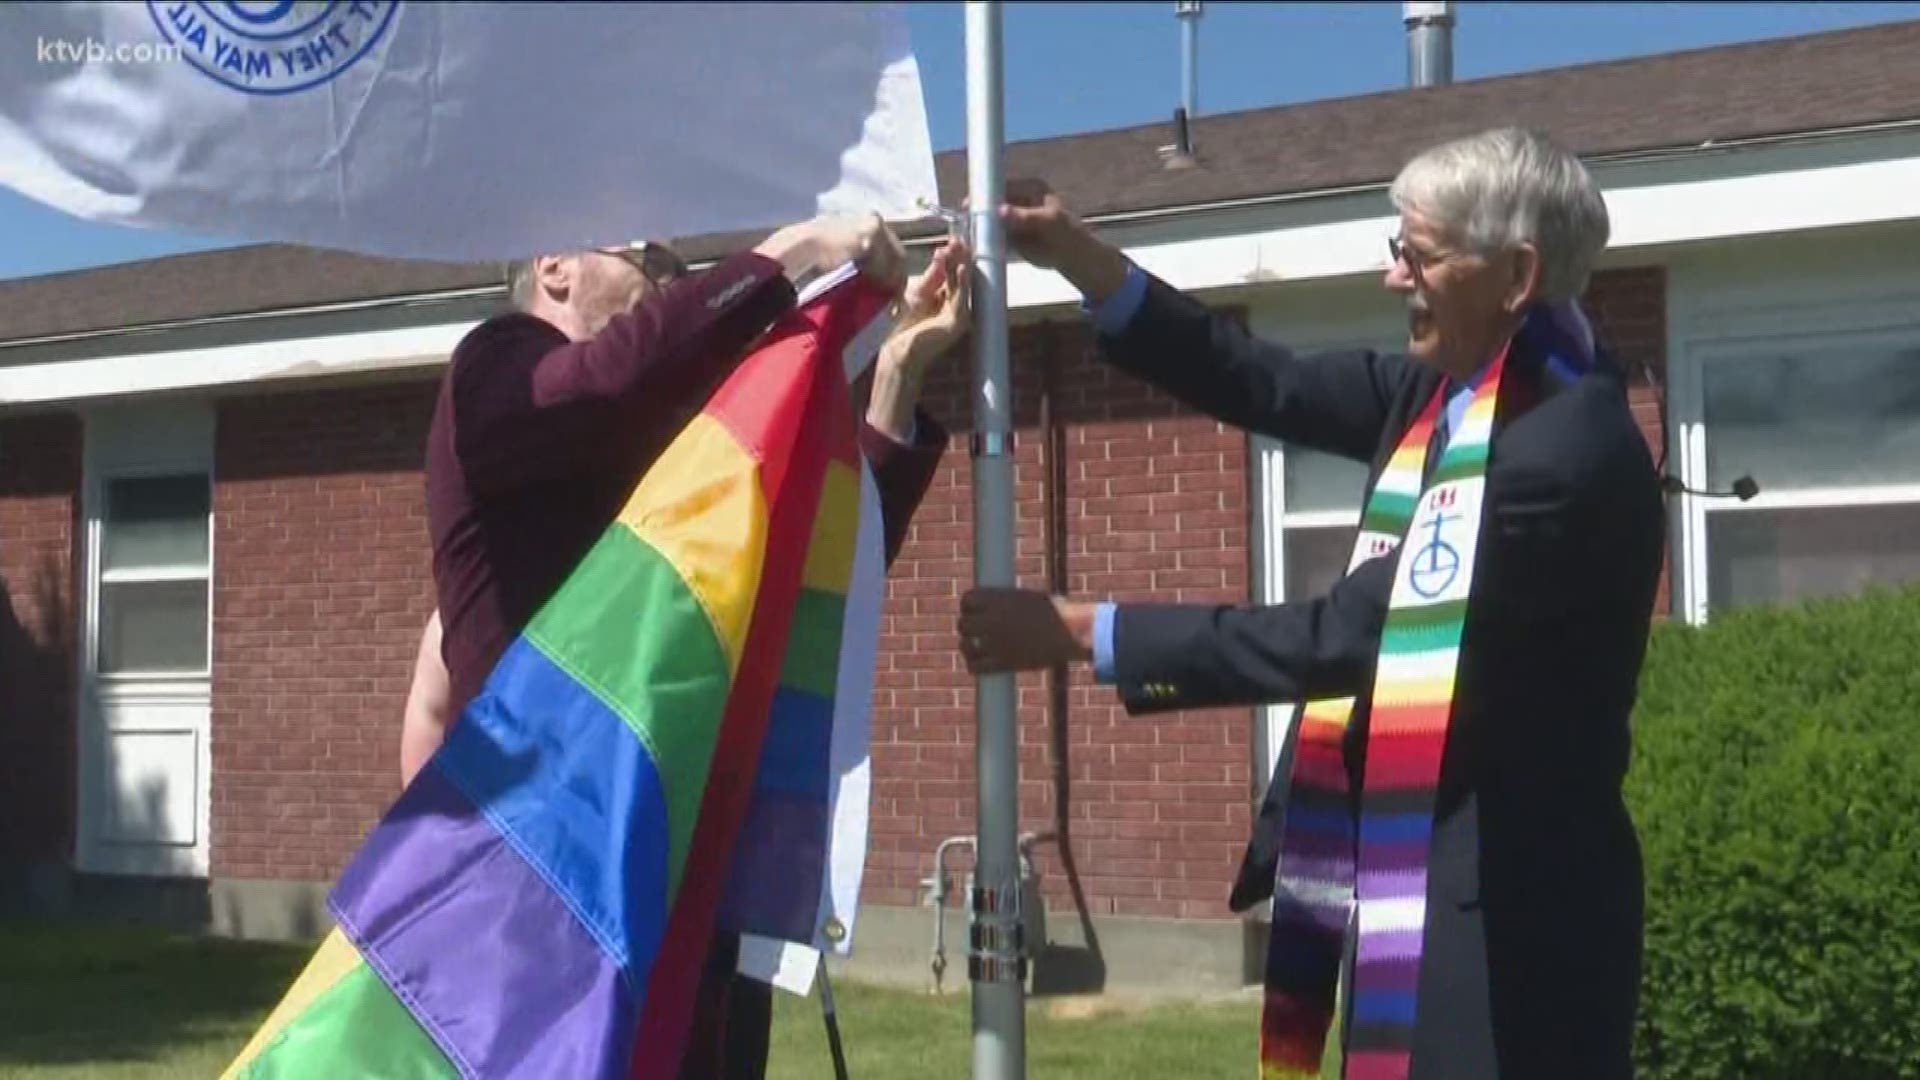 In honor of Pride Month, the Nampa United Church of Christ voted unanimously to fly the Pride flag for the month of June.